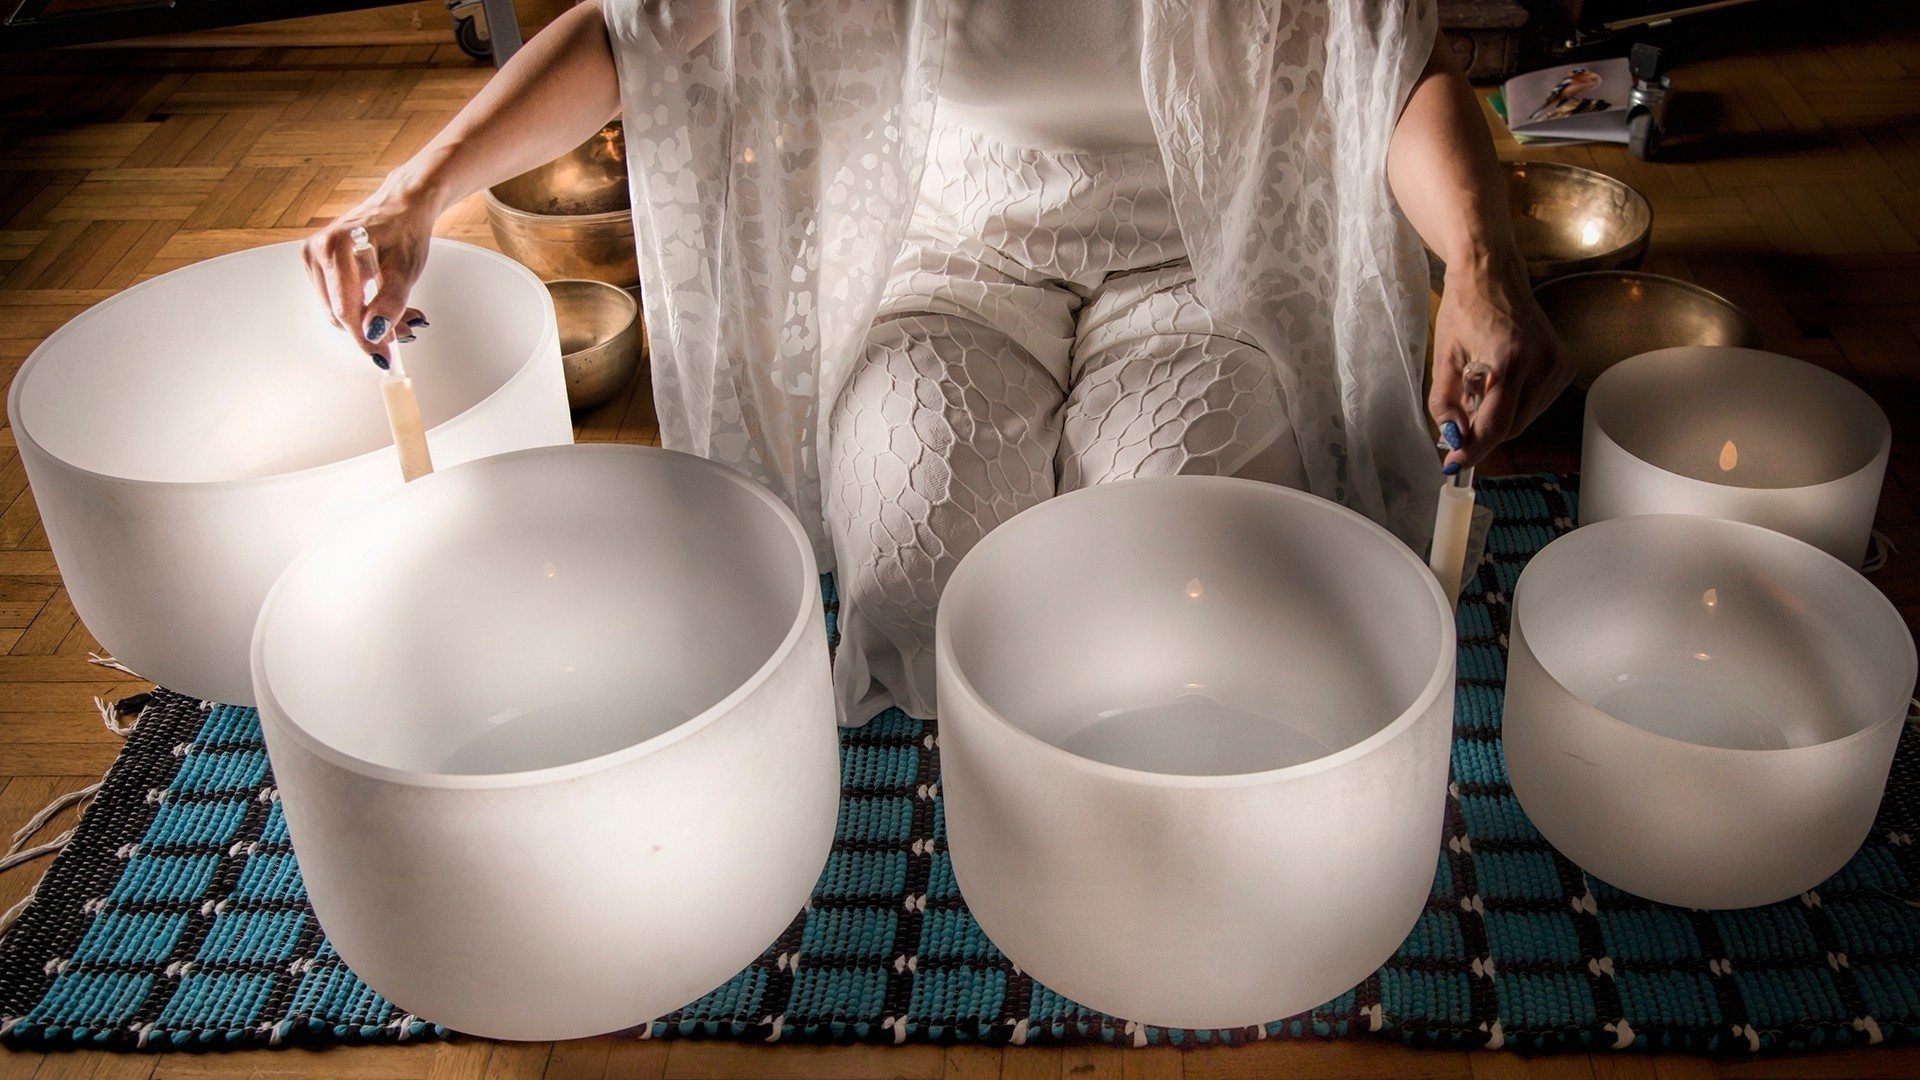 NASHVILLE, TENNESSEE - Sound Healing with Crystal Singing Bowls